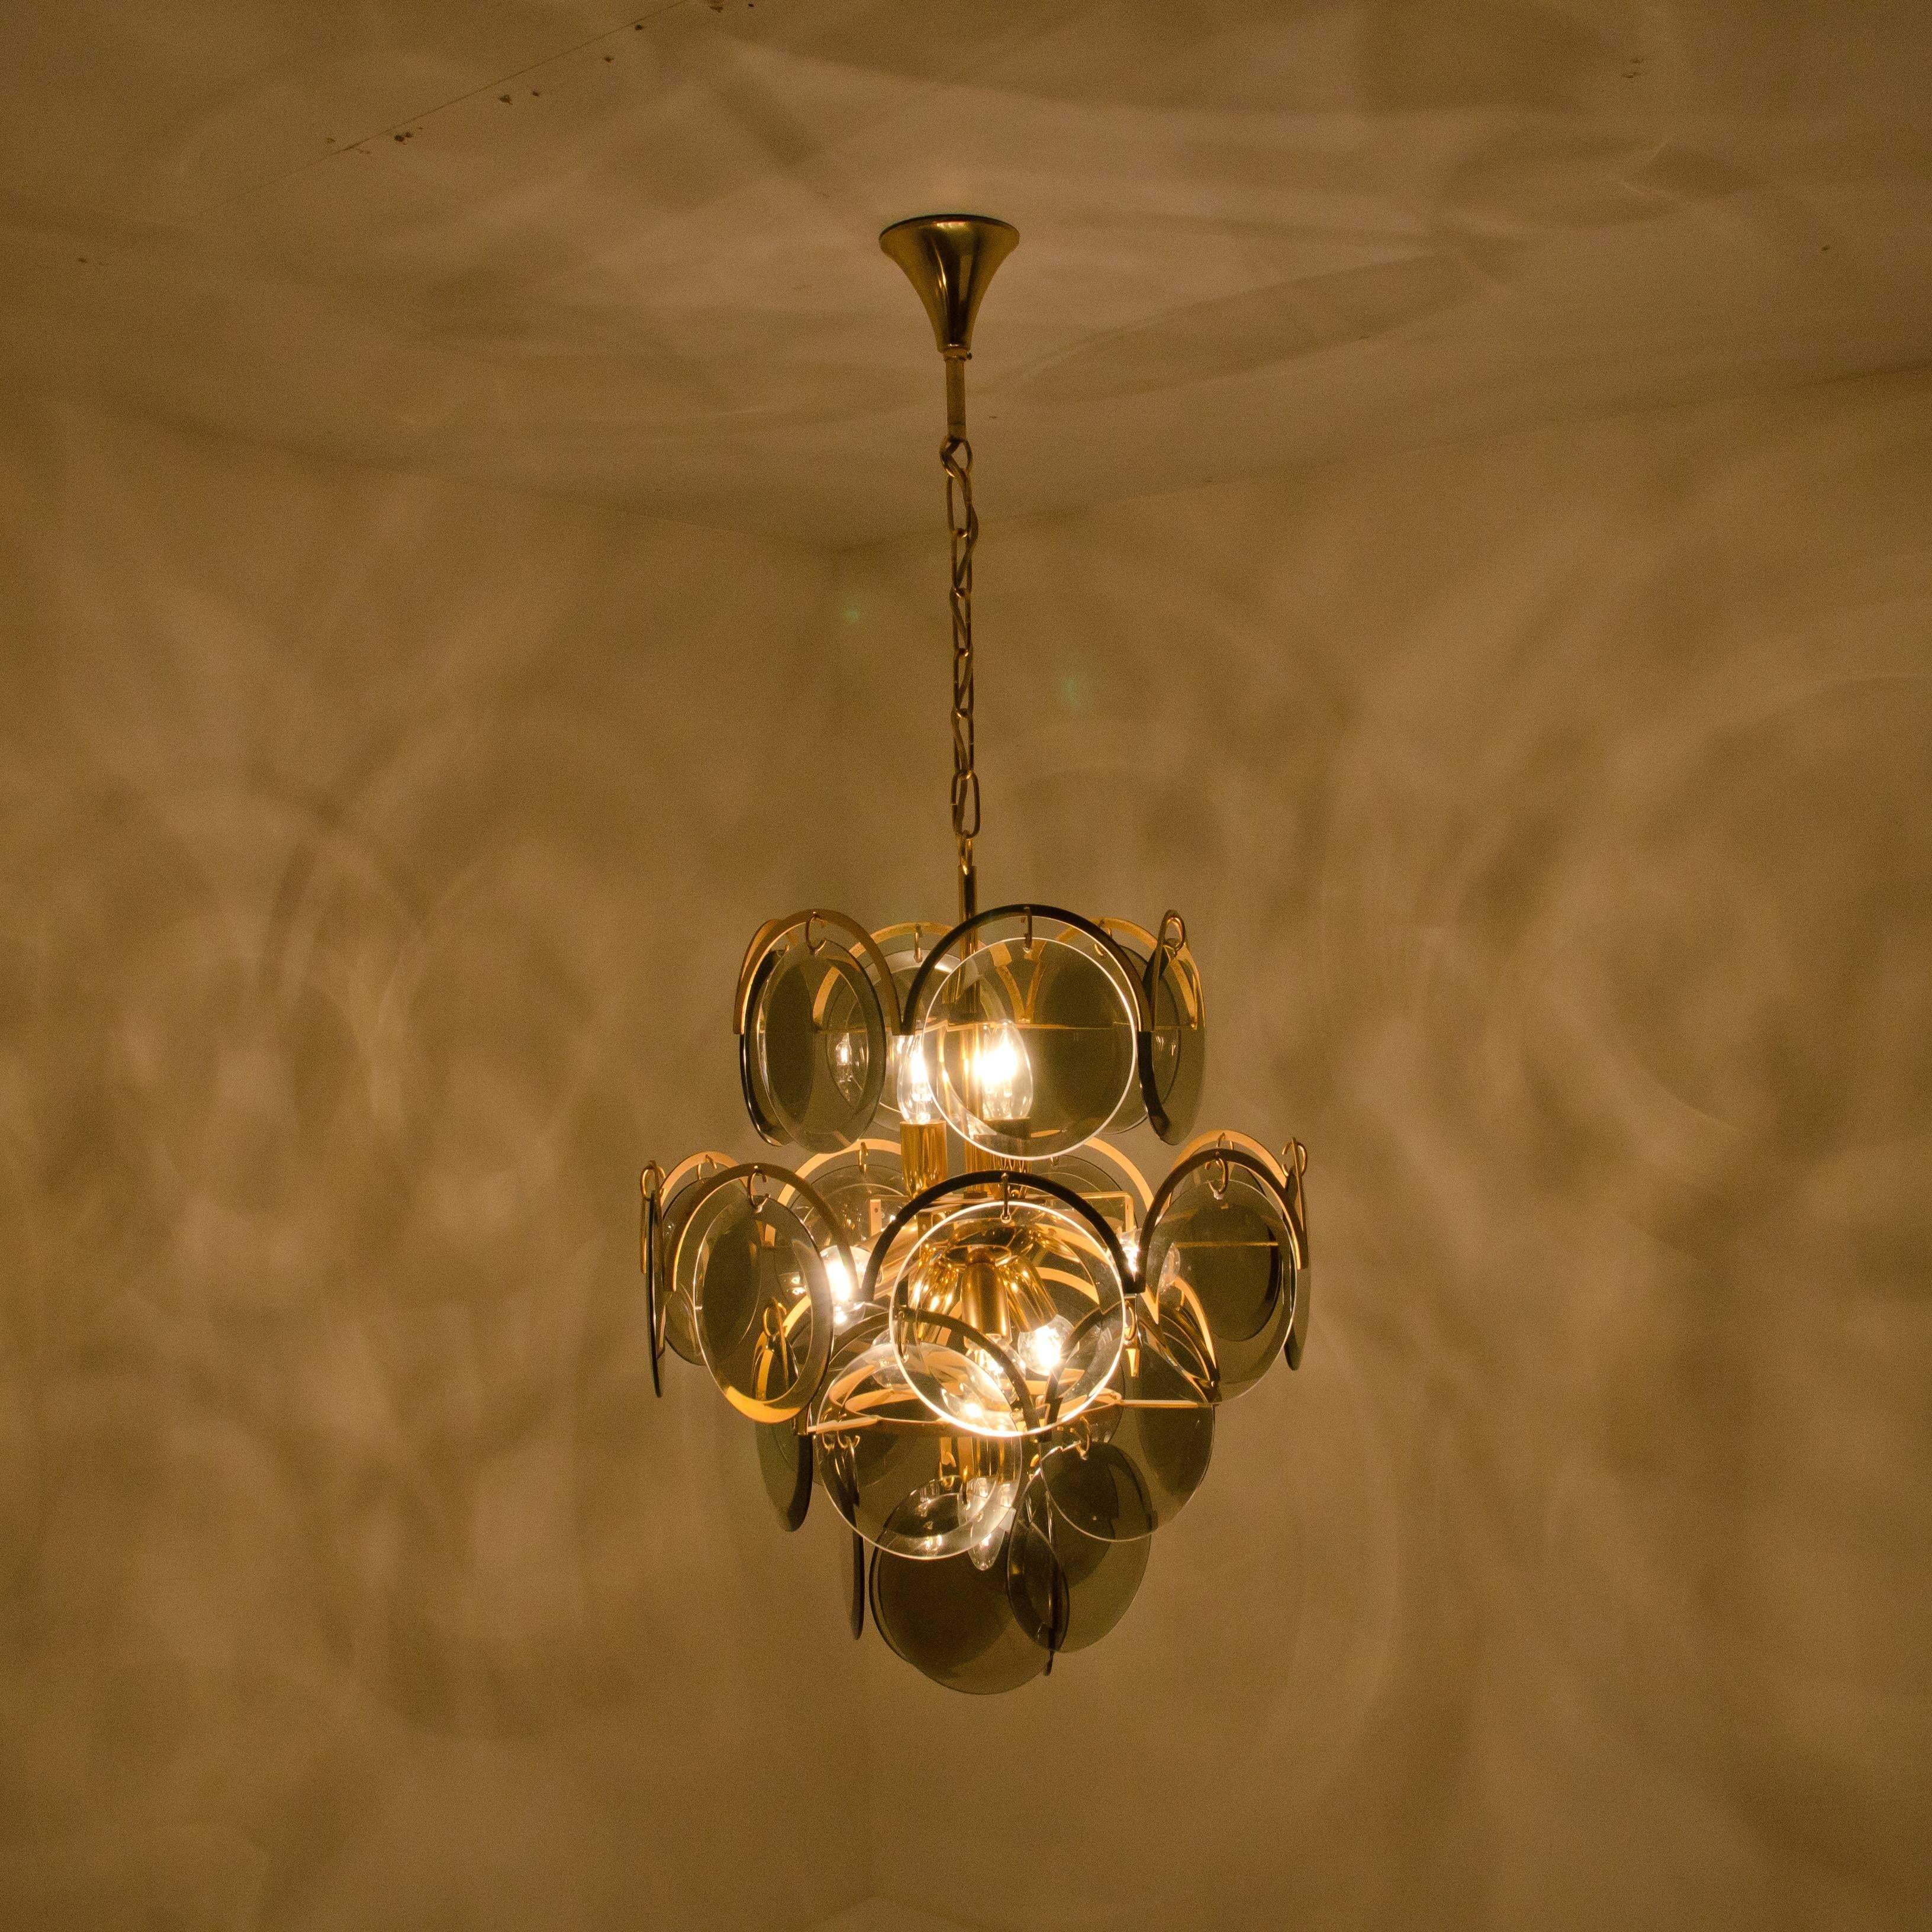 Set of Three Smoked Glass and Brass Chandeliers in the Style of Vistosi, Italy For Sale 1